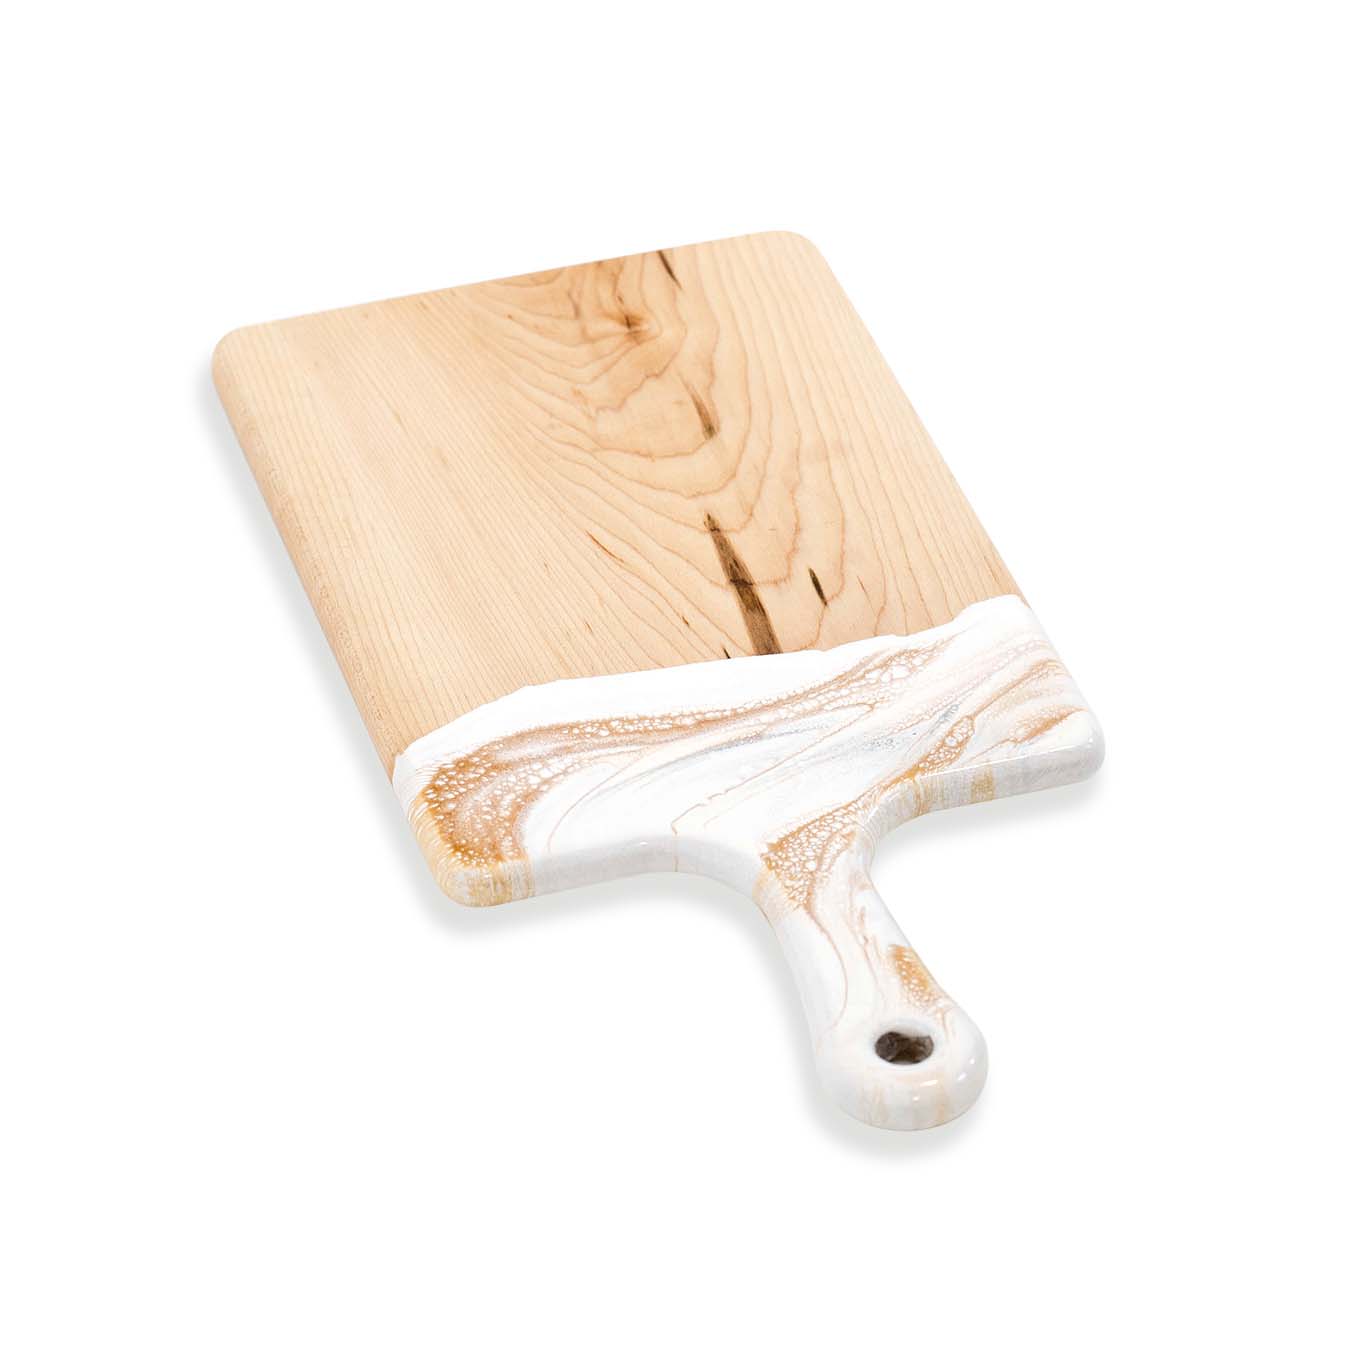 Handcrafted Chic Rustic Canadian Maple Resin Cheeseboards